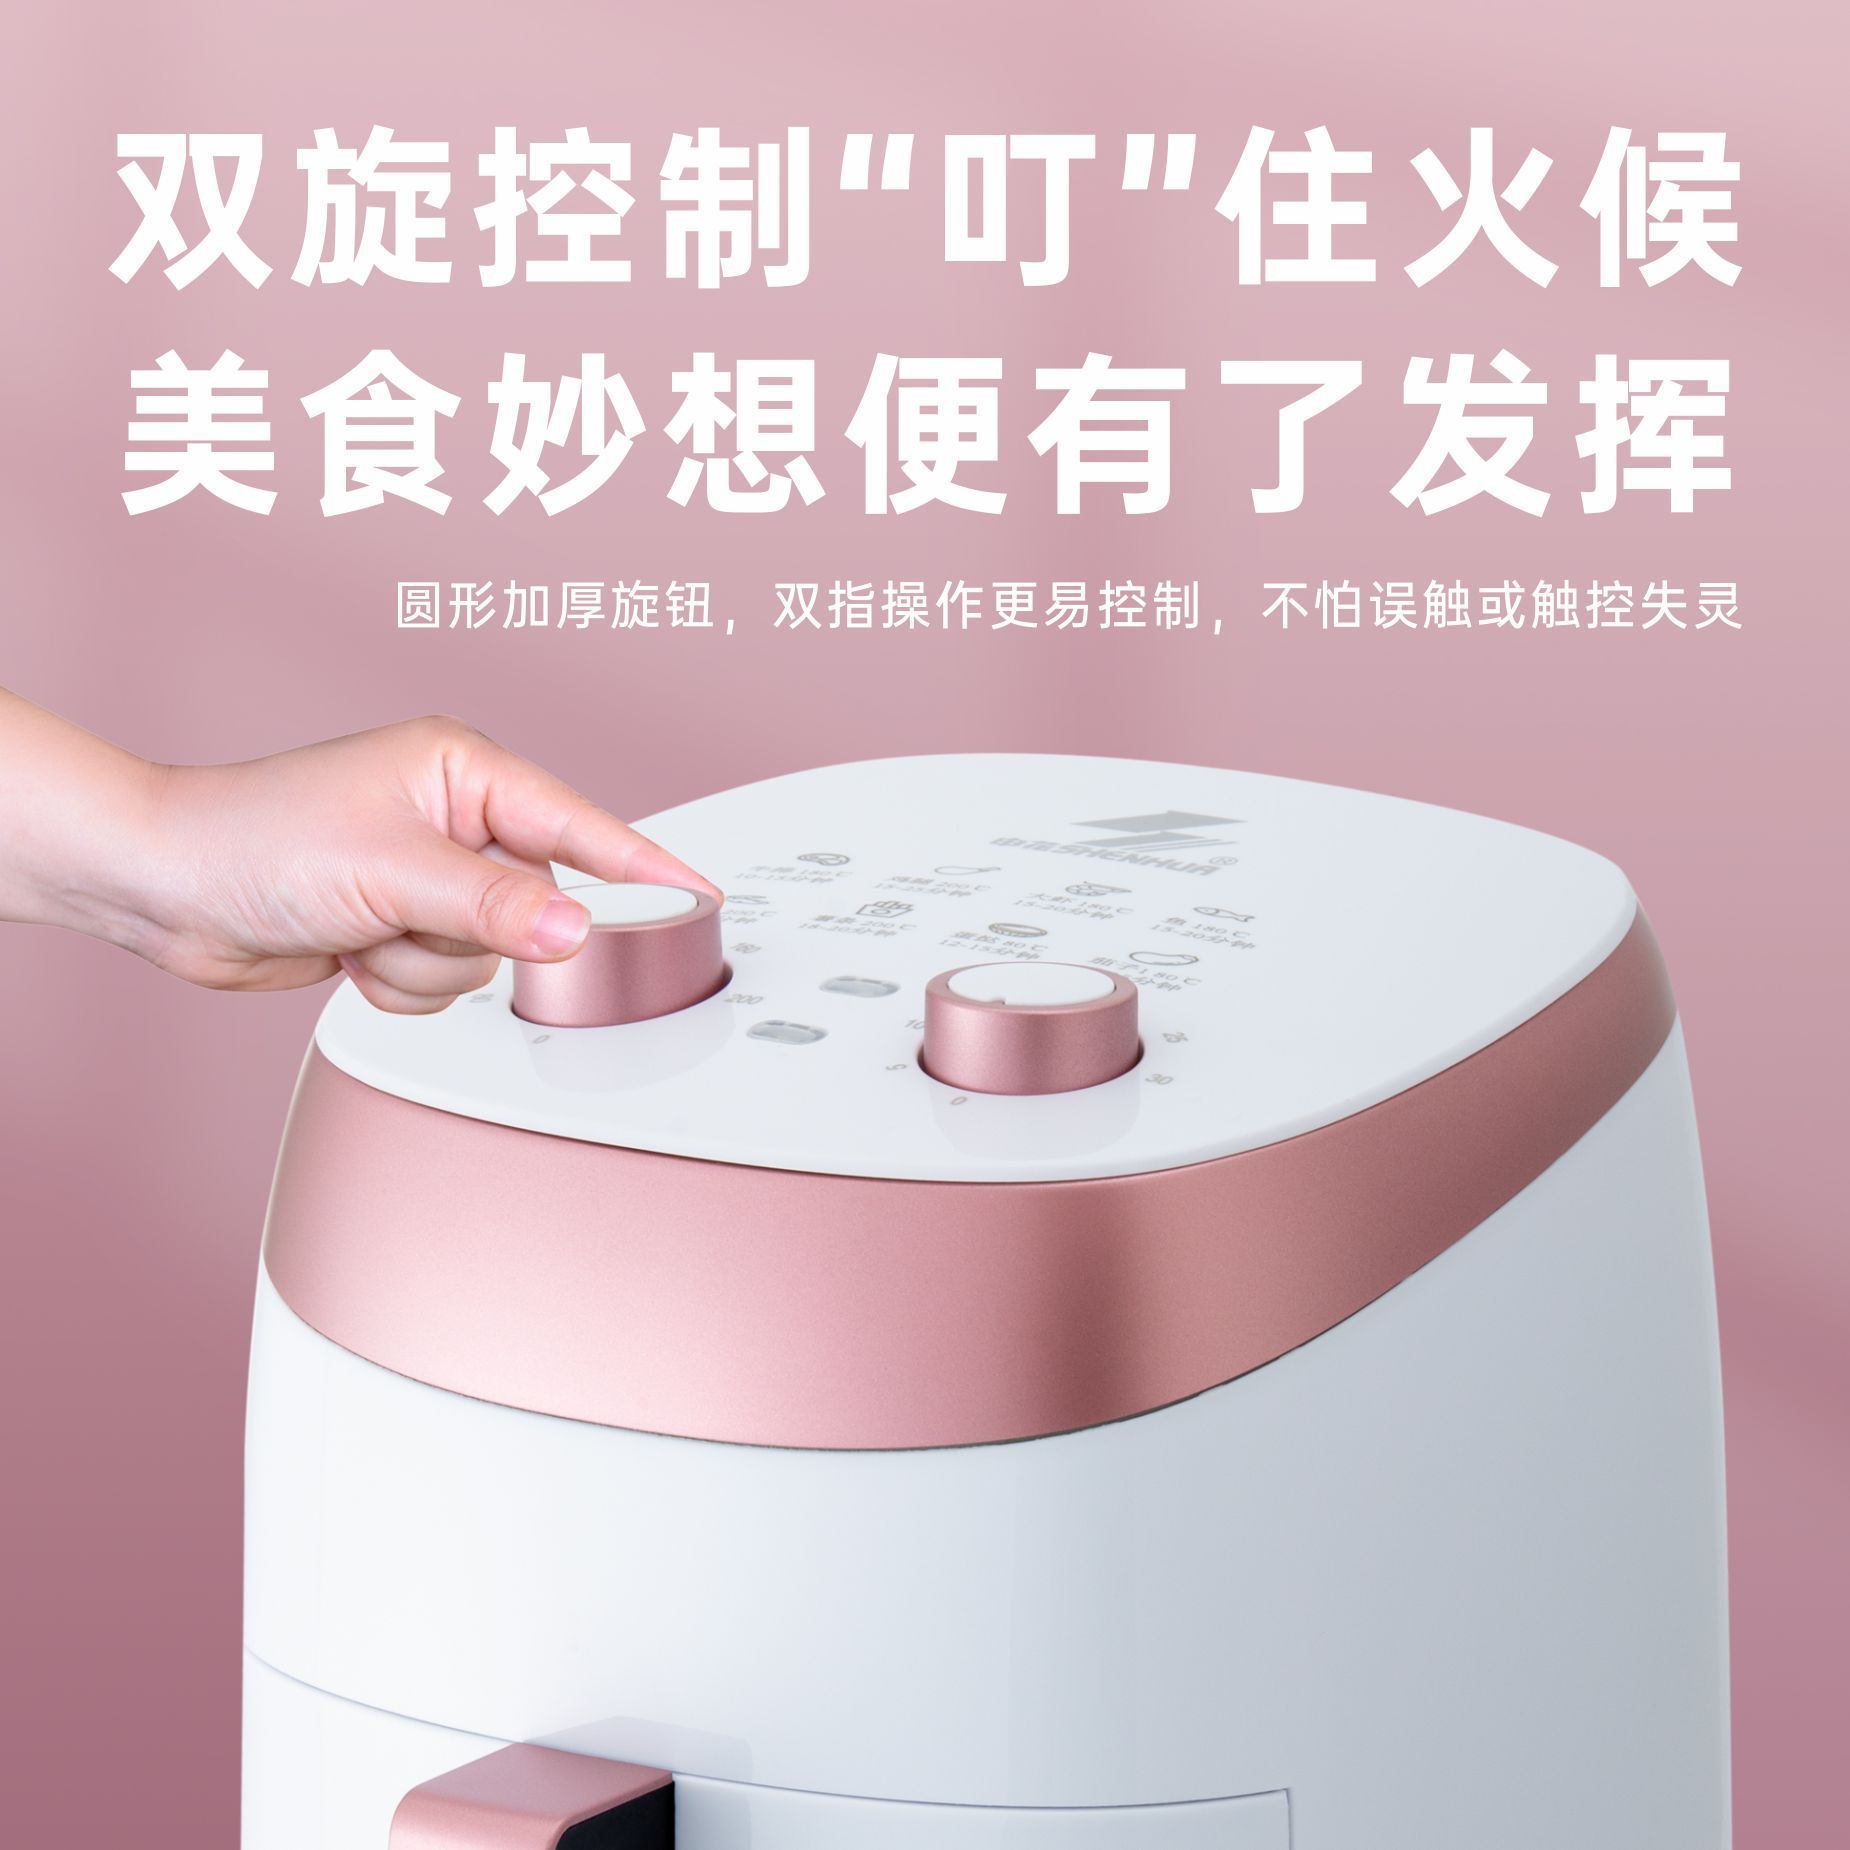 Air Fryer Household Intelligent Multi-Functional Large Capacity New Air Explosion Electricity Chips Machine Electric Oven Integrated